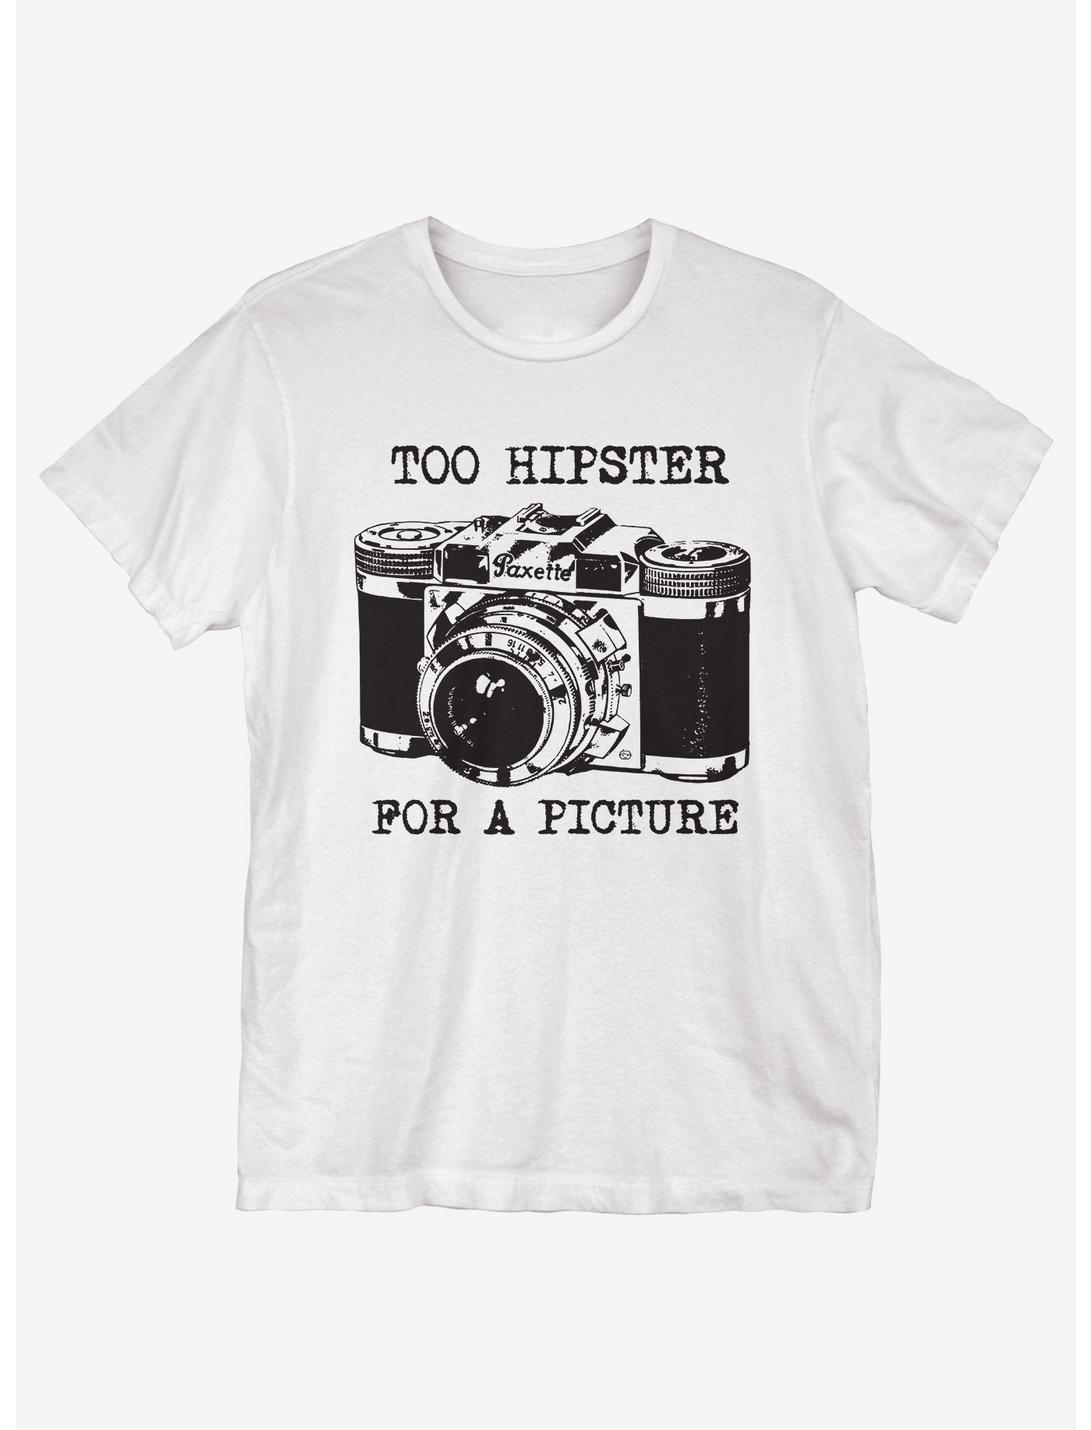 Too Hipster For A Picture T-Shirt, WHITE, hi-res